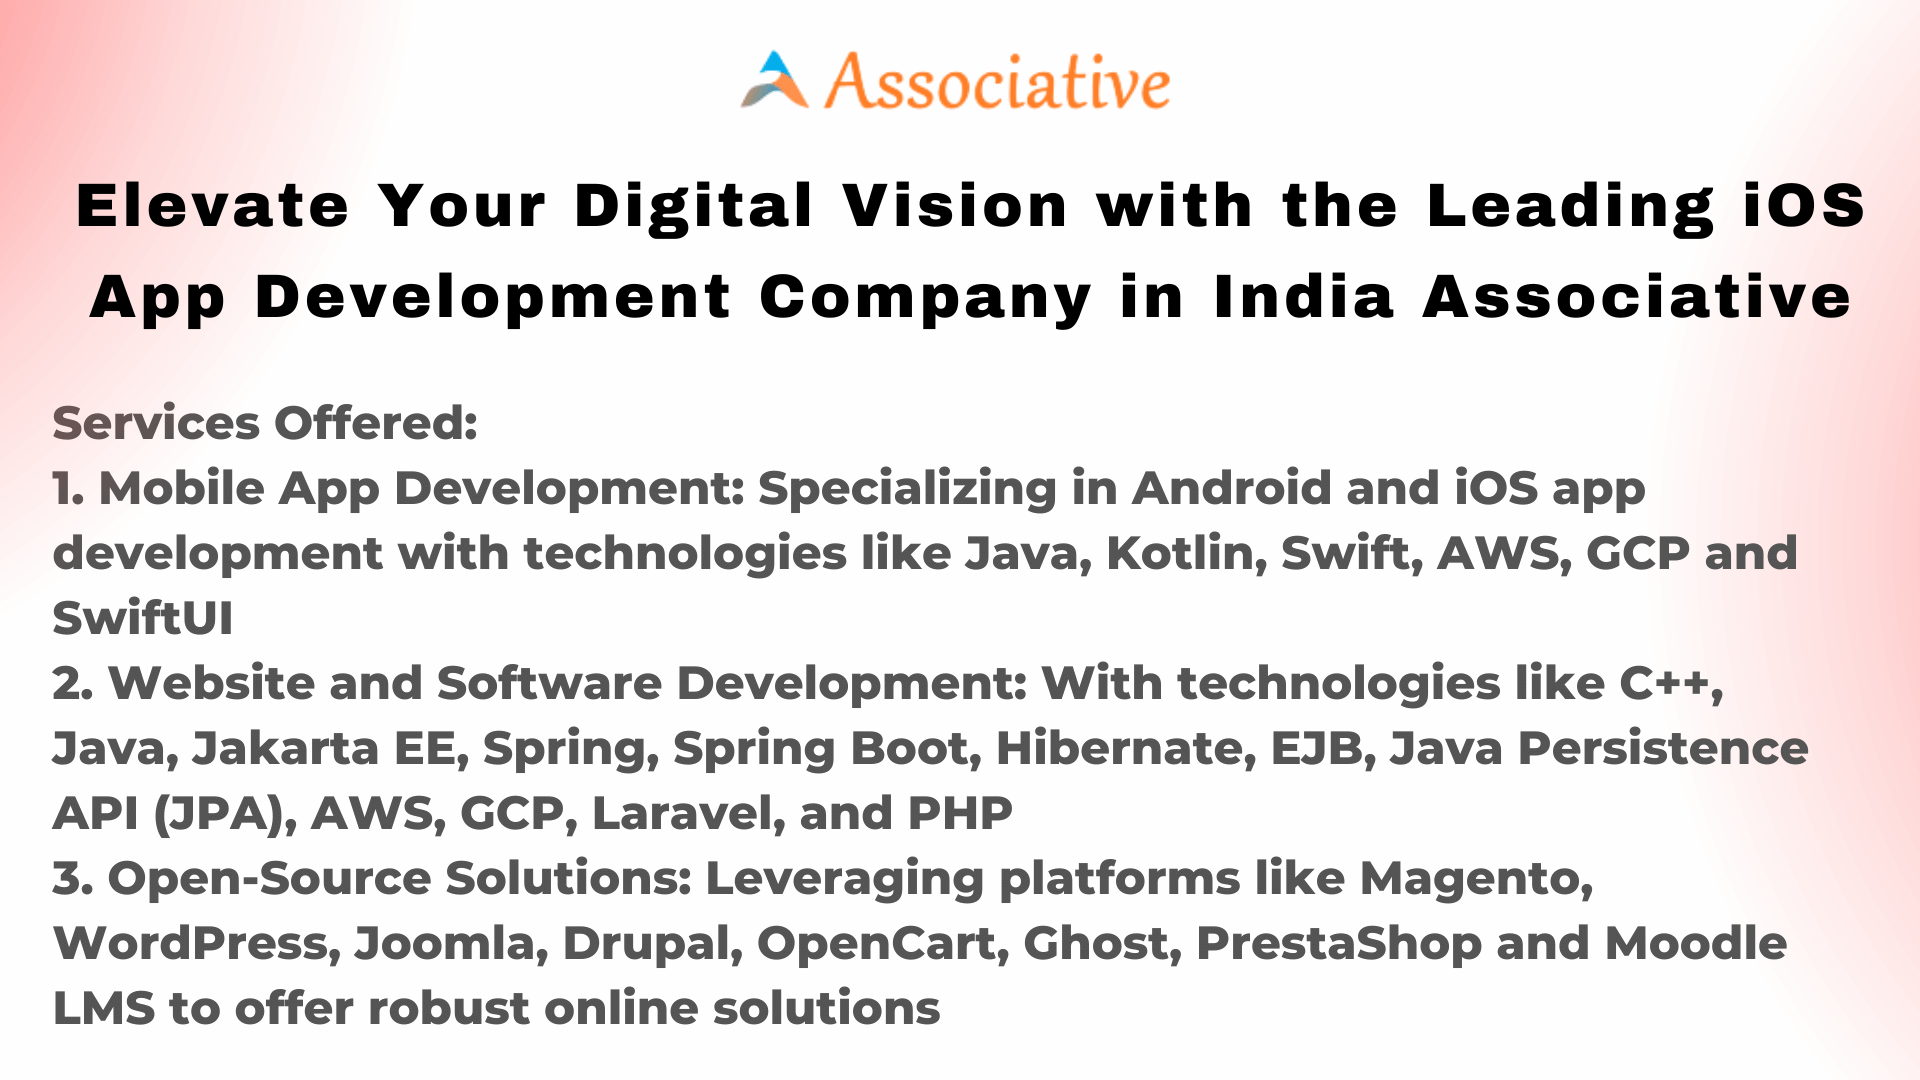 Elevate Your Digital Vision with the Leading iOS App Development Company in India Associative